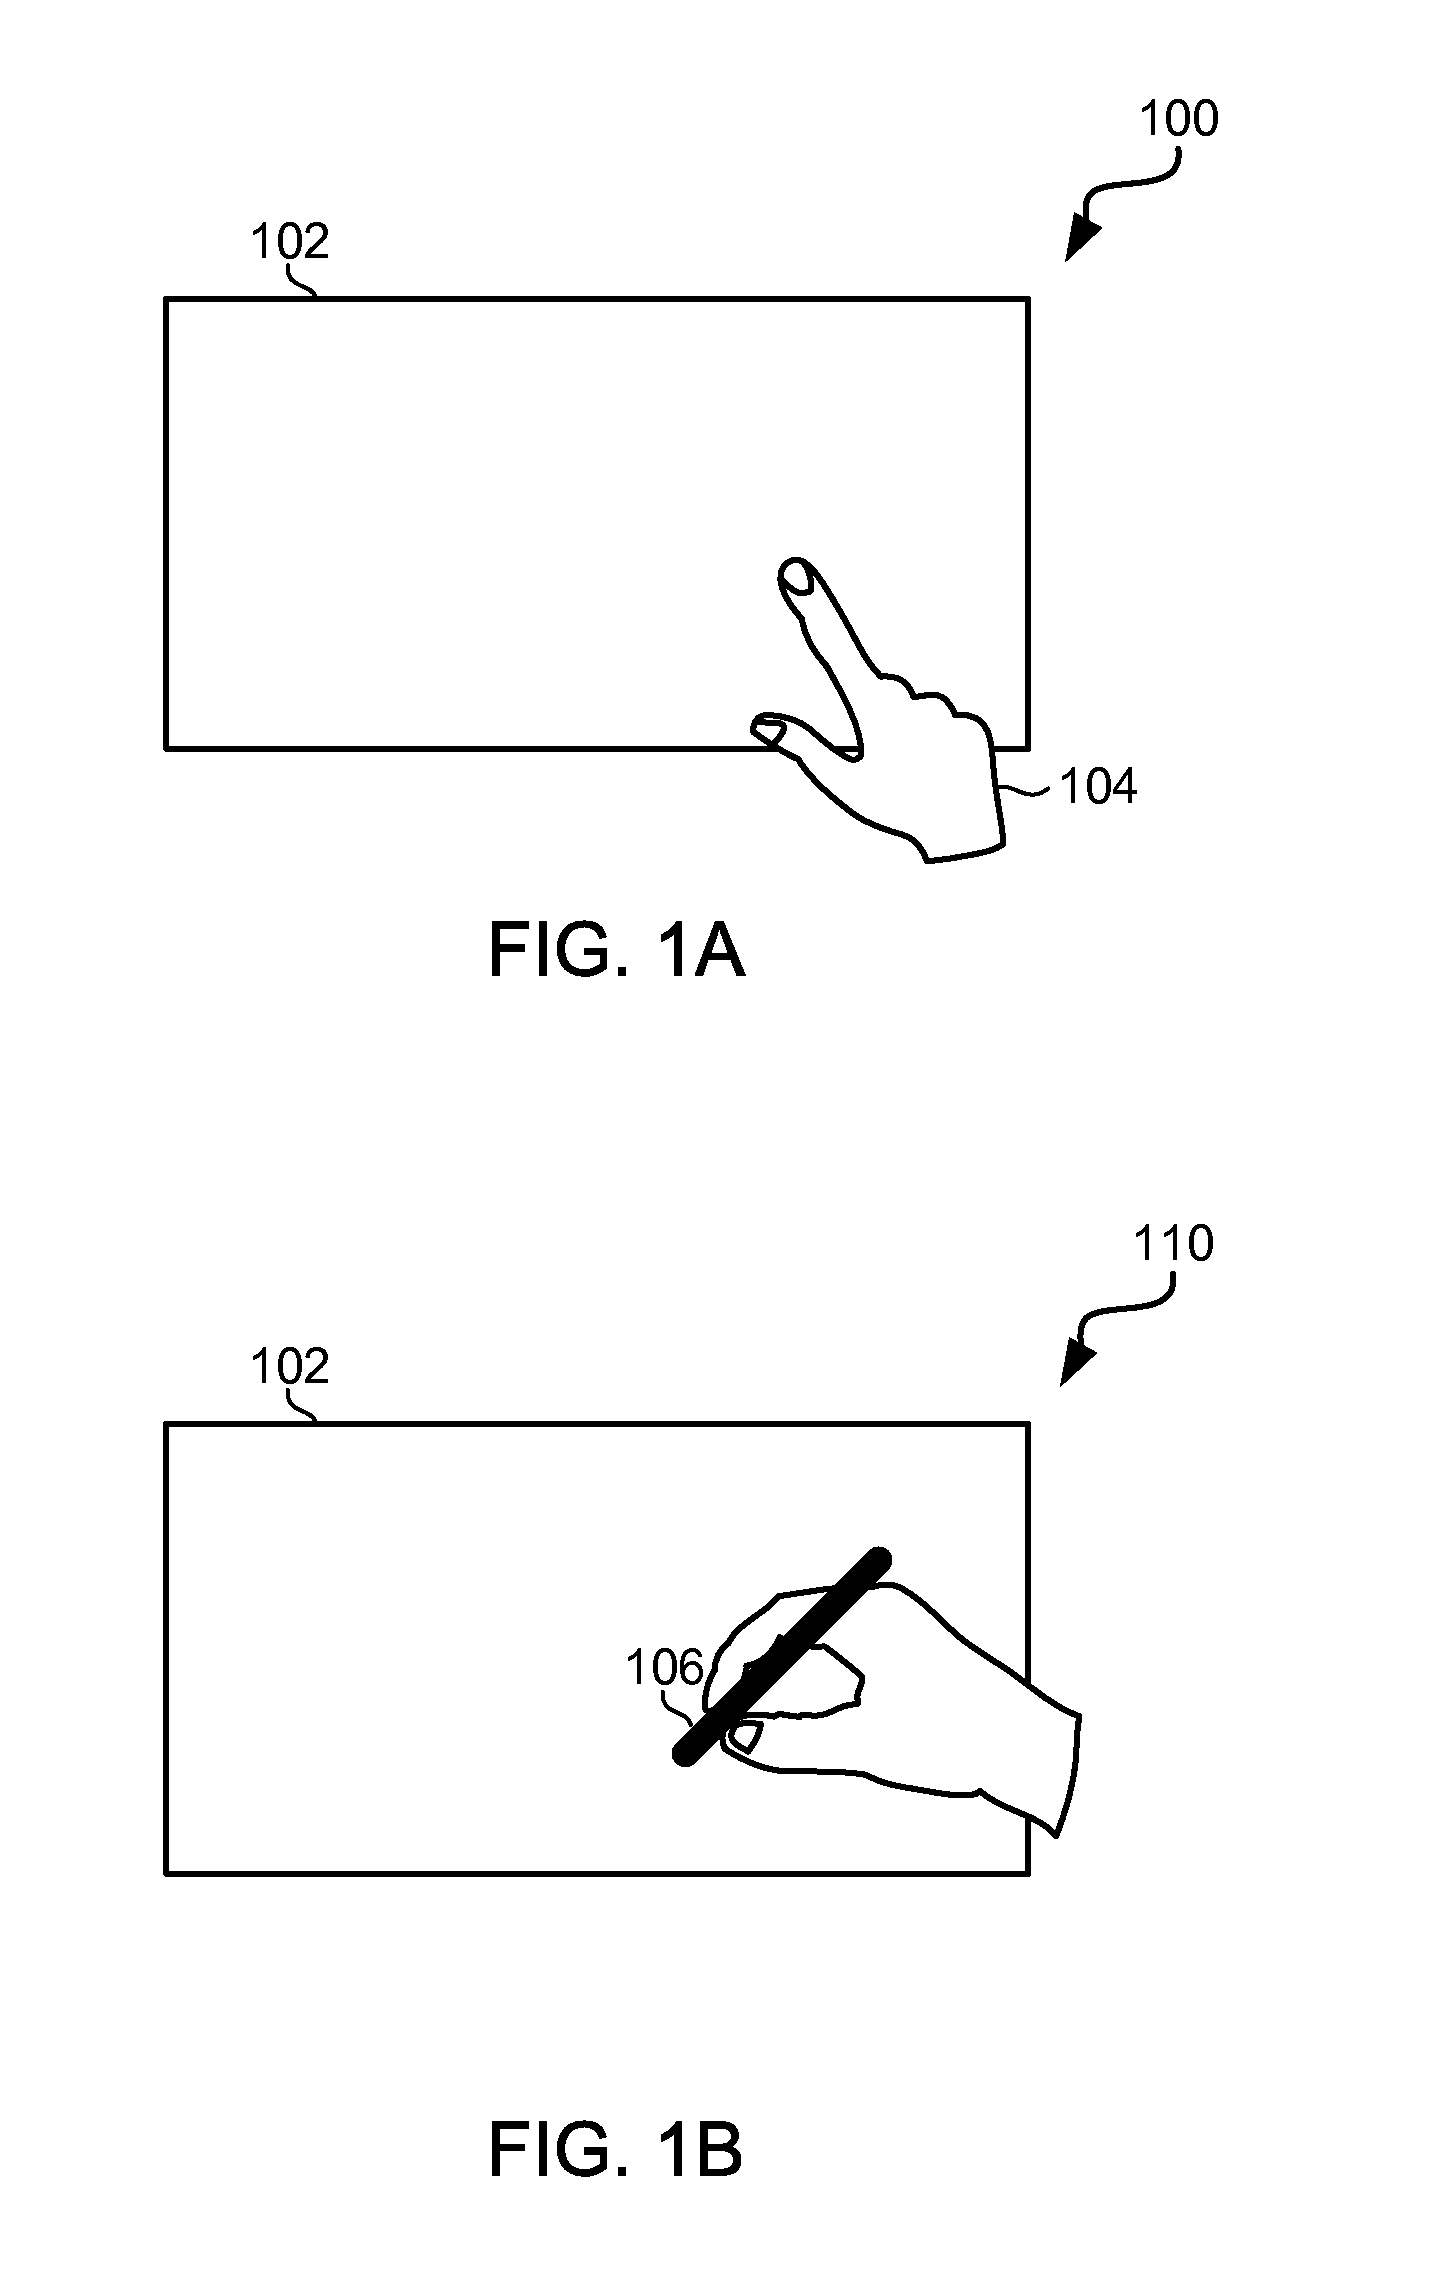 Auto-morphing adaptive user interface device and methods